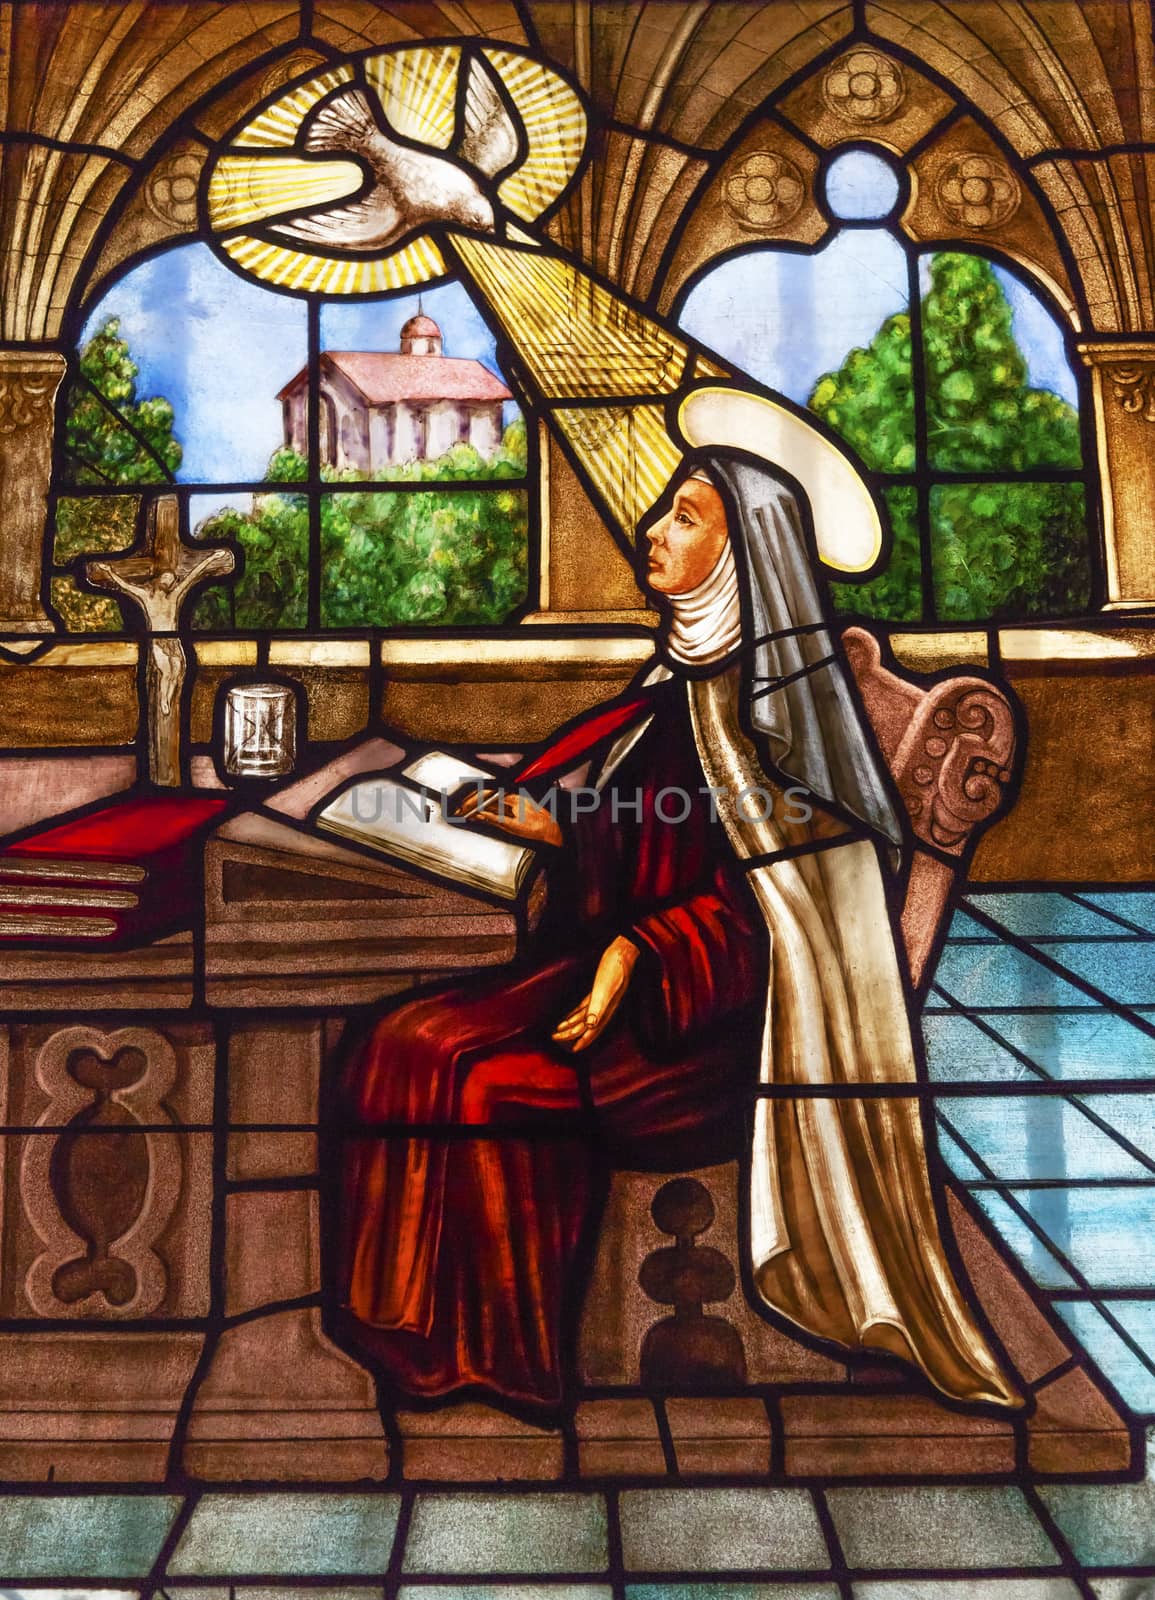 Saint Teresa Writing Stained Glass Convento de Santa Teresa Basilica Avila Castile Spain.  Convent founded in 1636 for Saint Teresa, Catholic nun, Counterreformation author, and Spanish mystic, who founded the Carmelite order. Died in 1582 and made a saint in 1614.